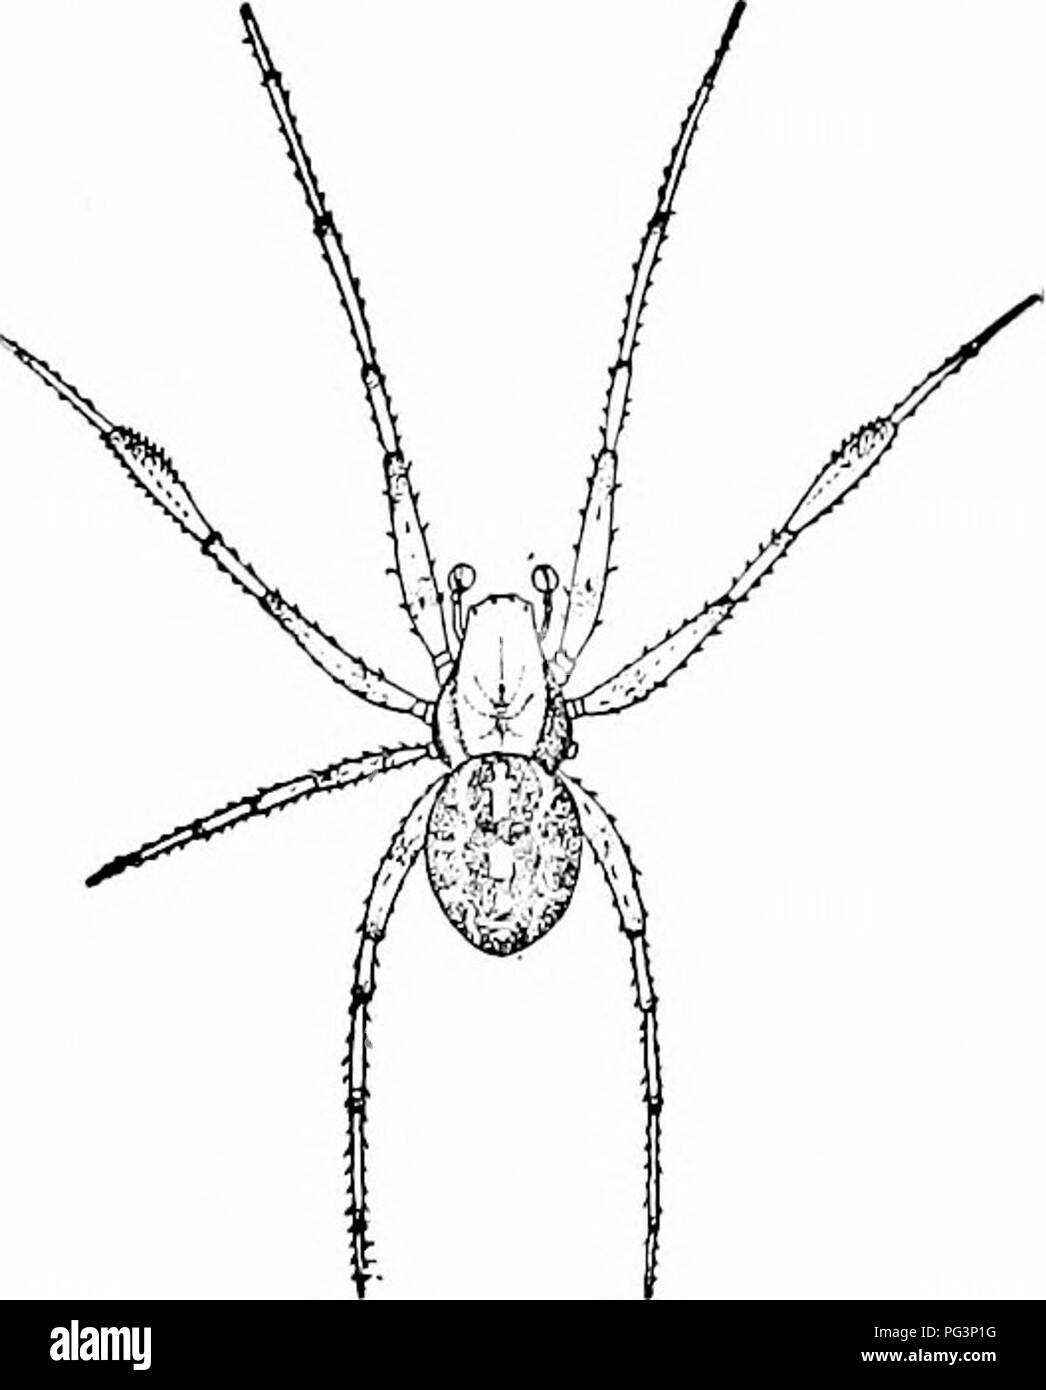 . A manual of zoology. Zoology. II ACERATA: ARANEINA 39; Legion II. Spliarogaslrida. Arachnida with the abdominal somites fused so that no traces of seg- mentation remain. Order I. Araneina. In the spiders the soft-skinned body is divided by a deep constriction into cephalothorax and abdomen (fig. 426). The four pairs of legs are adapted for springing or for walking, the hinder pair being also accessory to the spinning. It bears a comb-like claw with which several threads are combined into a stronger cable. The chelicera bears a sharp claw (fig. 419), traversed by the duct of the poison gland  Stock Photo